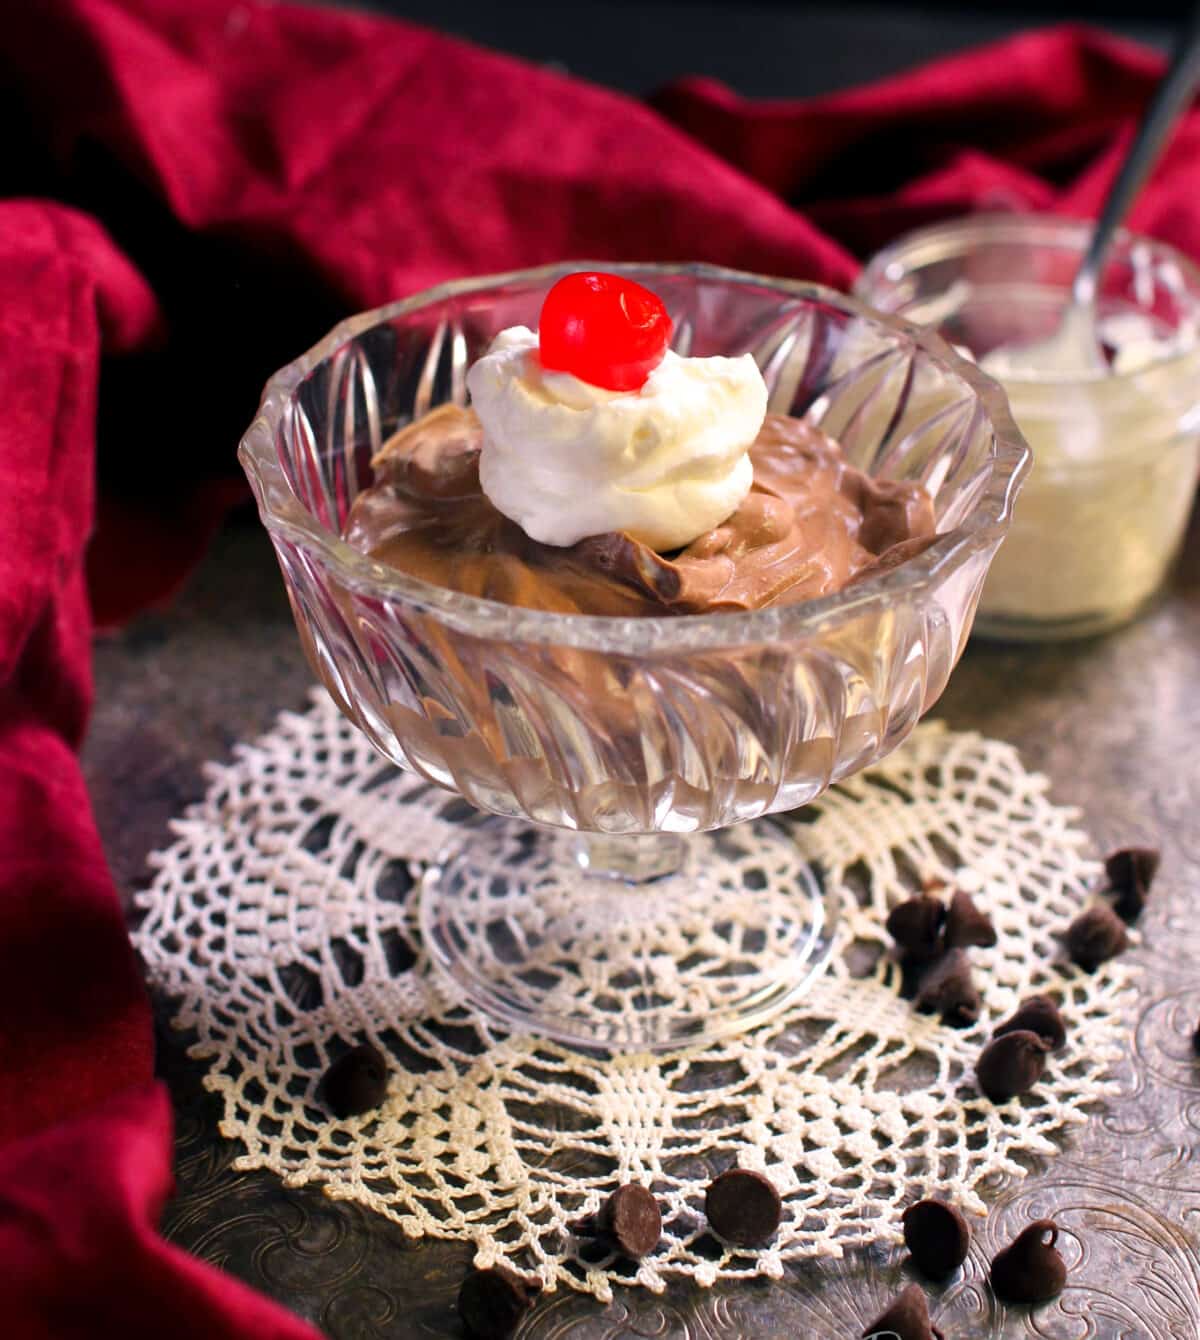 a bowl of chocolate mousse topped with whipped cream and a cherry.